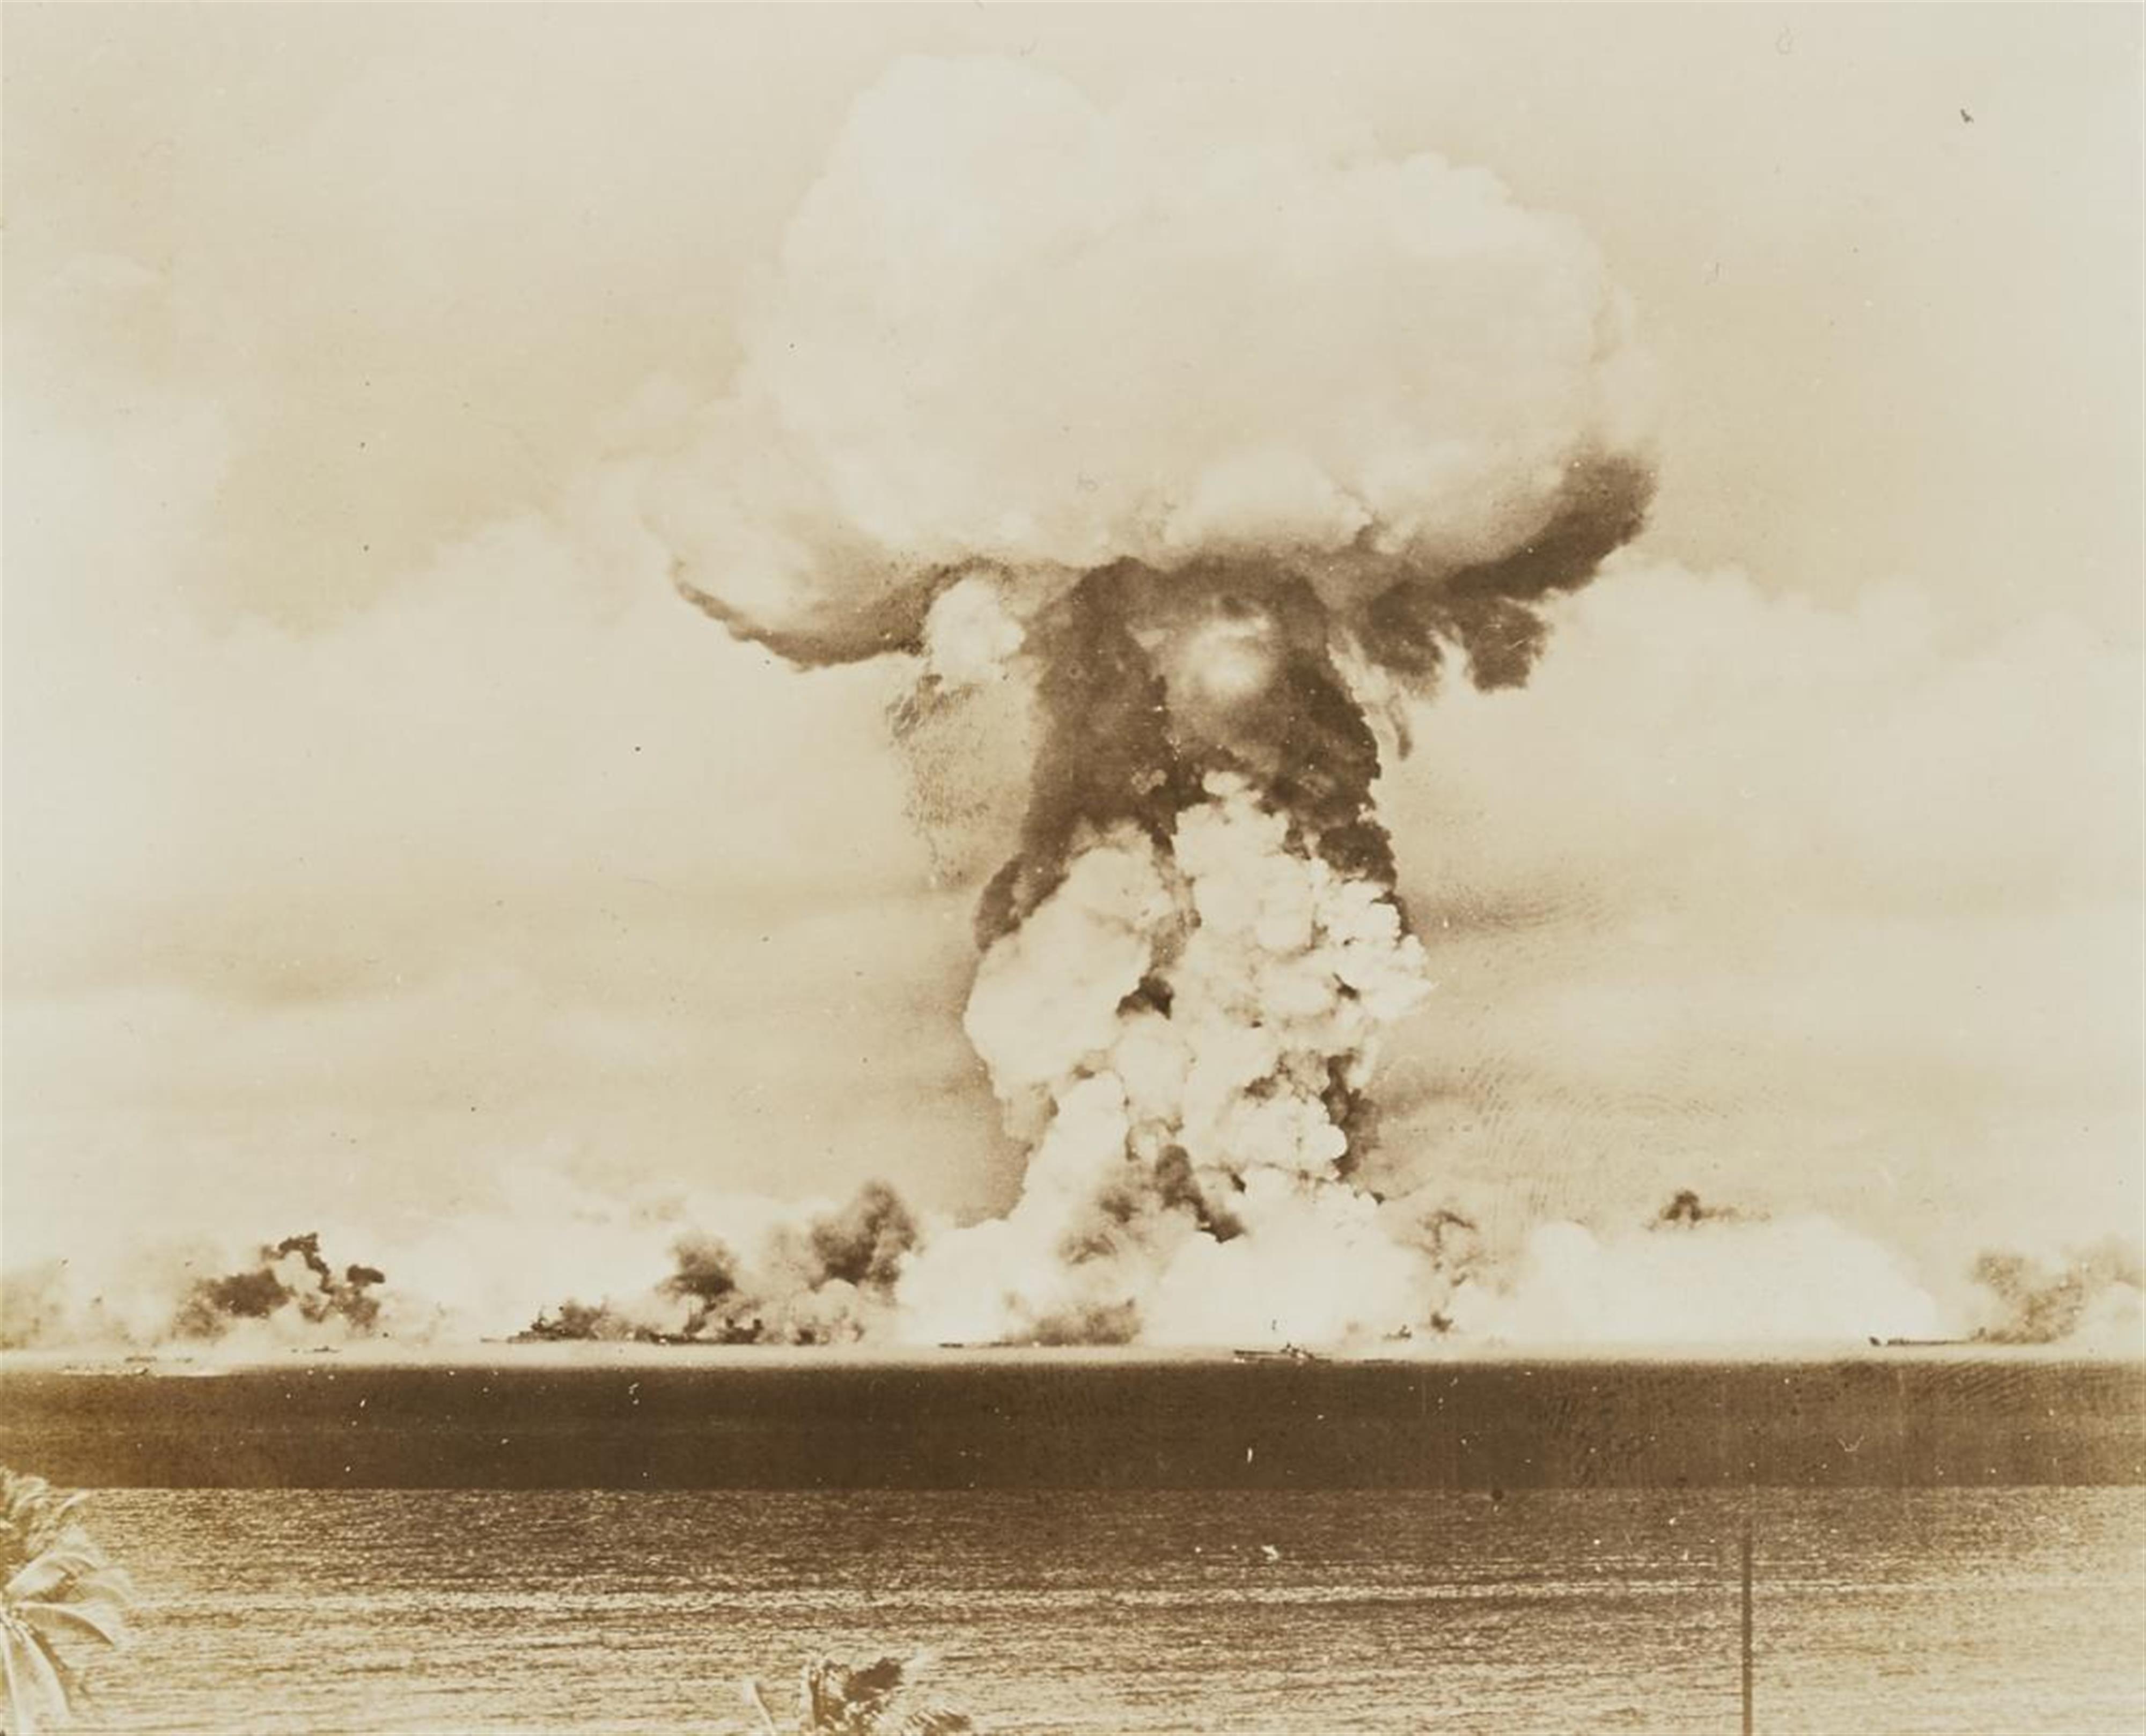 Official Photograph U.S. Navy - "Able" Atomic Bomb Test. "Able" Atomic Bomb Test. "Baker" Atomic Bomb Test. - image-2